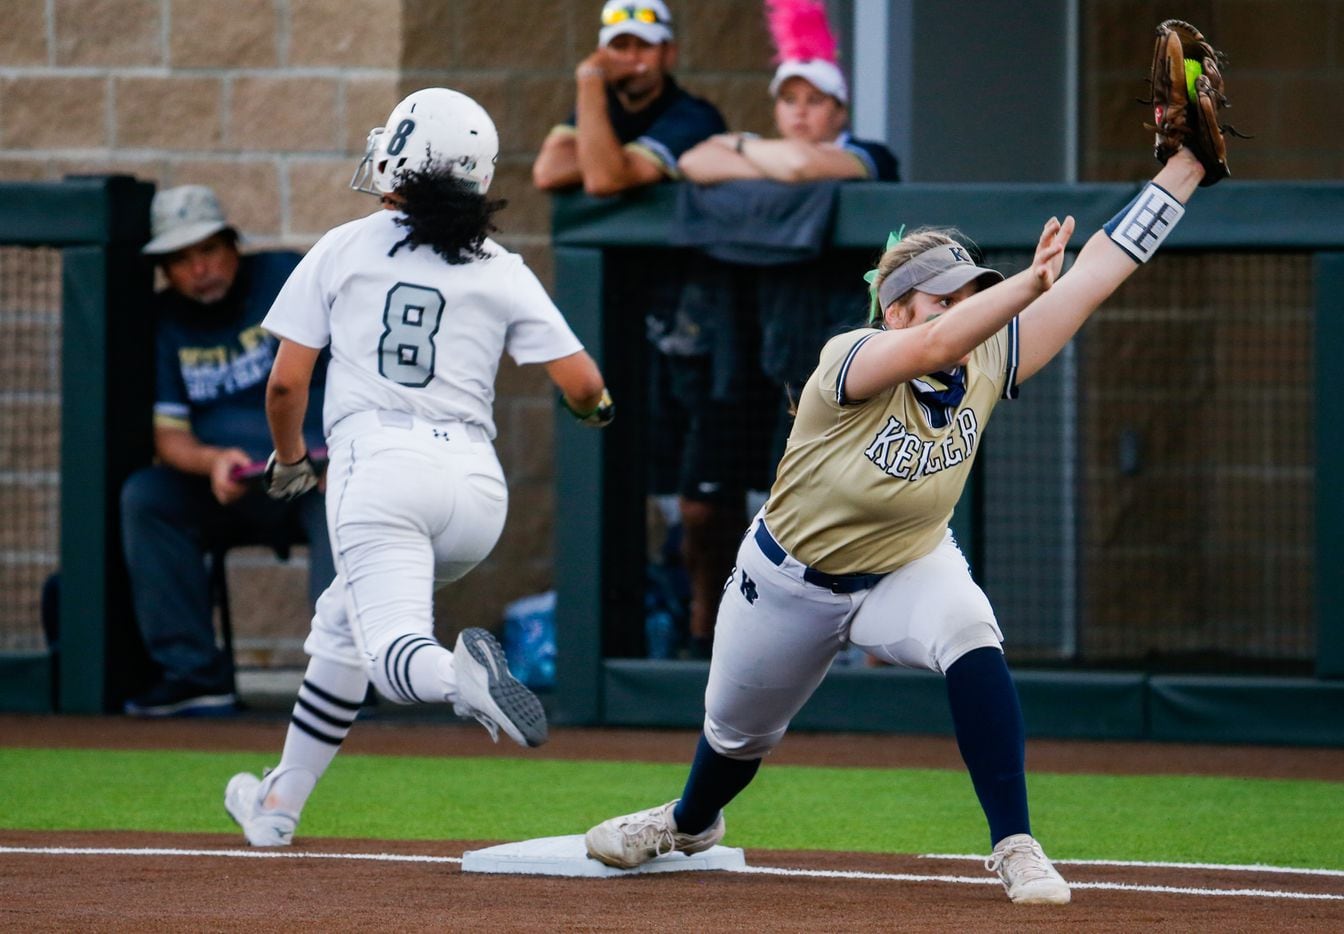 Denton Guyer's Tehya Pitts (8) is out at first base by Keller's Bella Smith (20) during the second inning of a nondistrict softball game in Denton on Tuesday, March 30, 2021. (Juan Figueroa/ The Dallas Morning News)